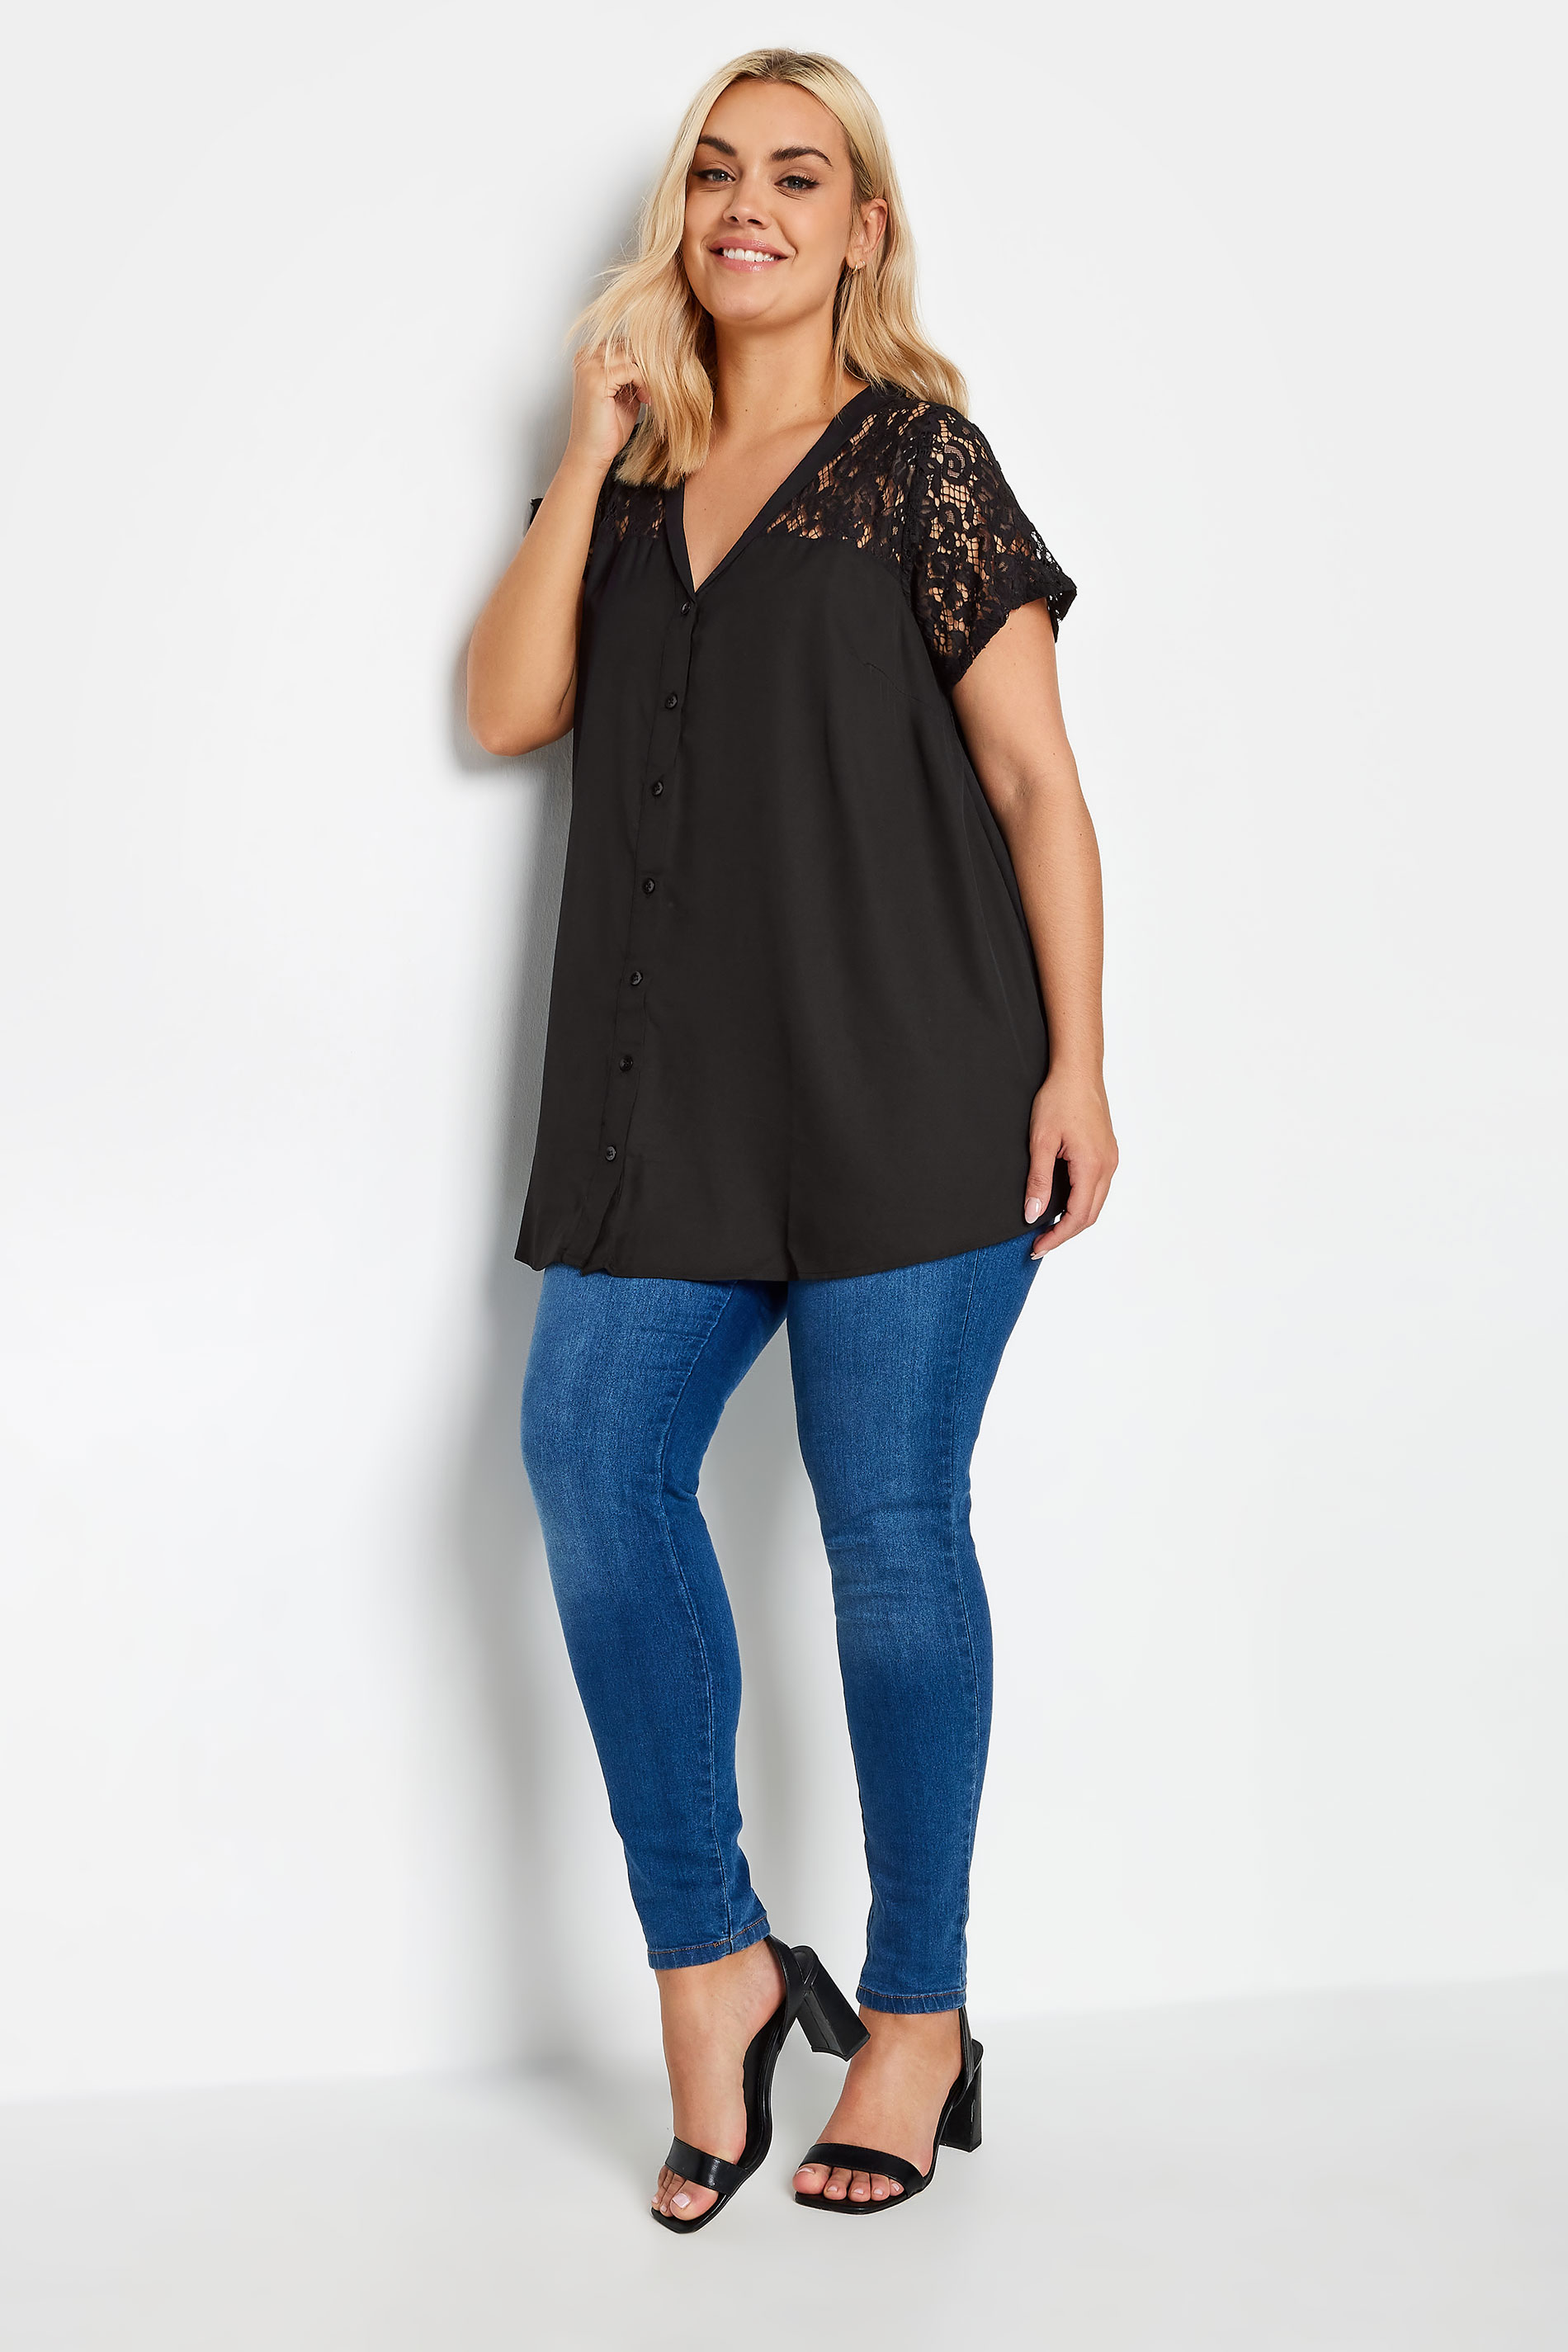 LIMITED COLLECTION Plus Size Black Lace Insert Blouse